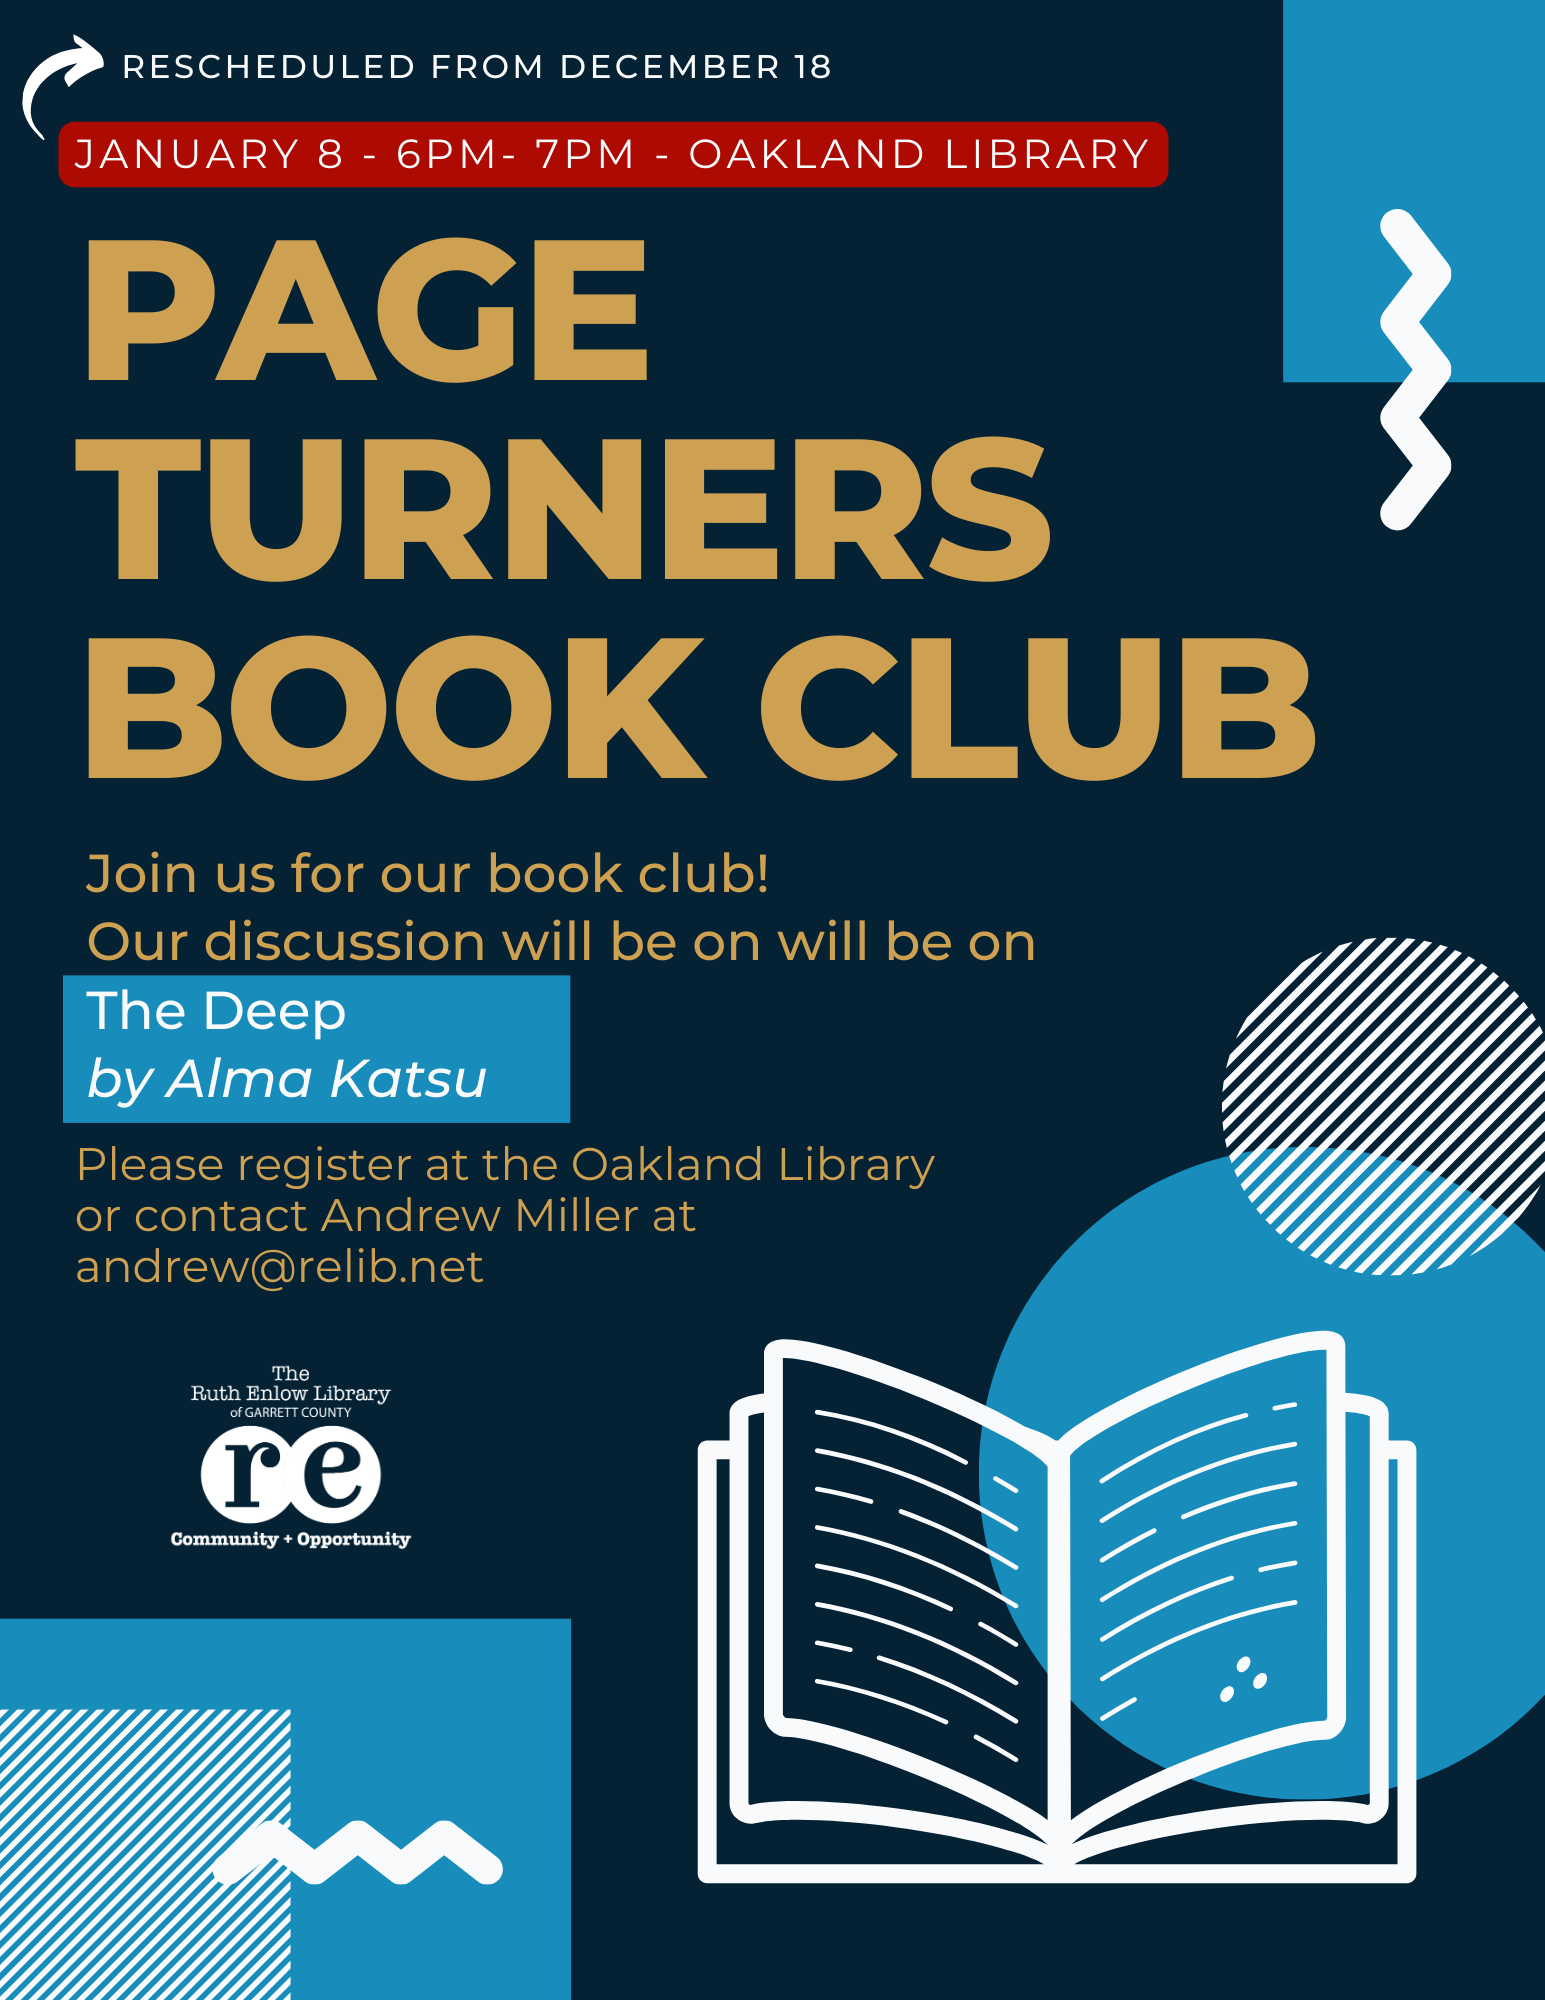 shapes, open book; flyer advertising pager turners book club January 8 meeting rescheduled from December 18